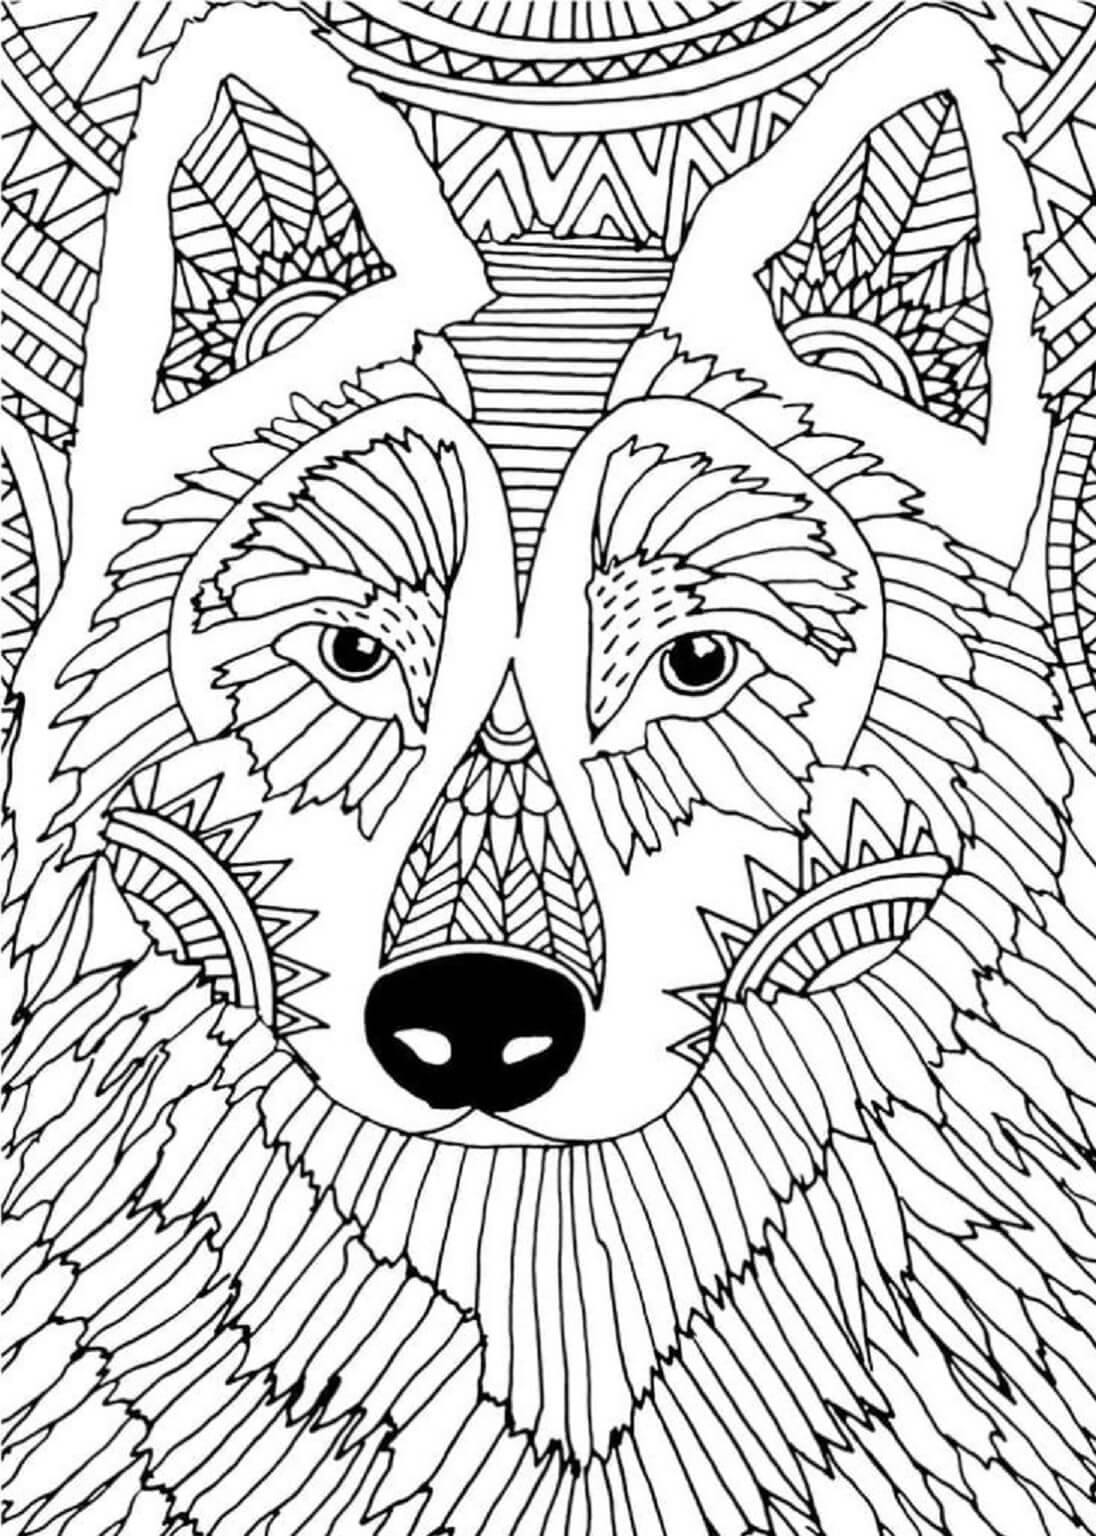 Basic Wolf Head Mandala coloring page - Download, Print or Color Online ...